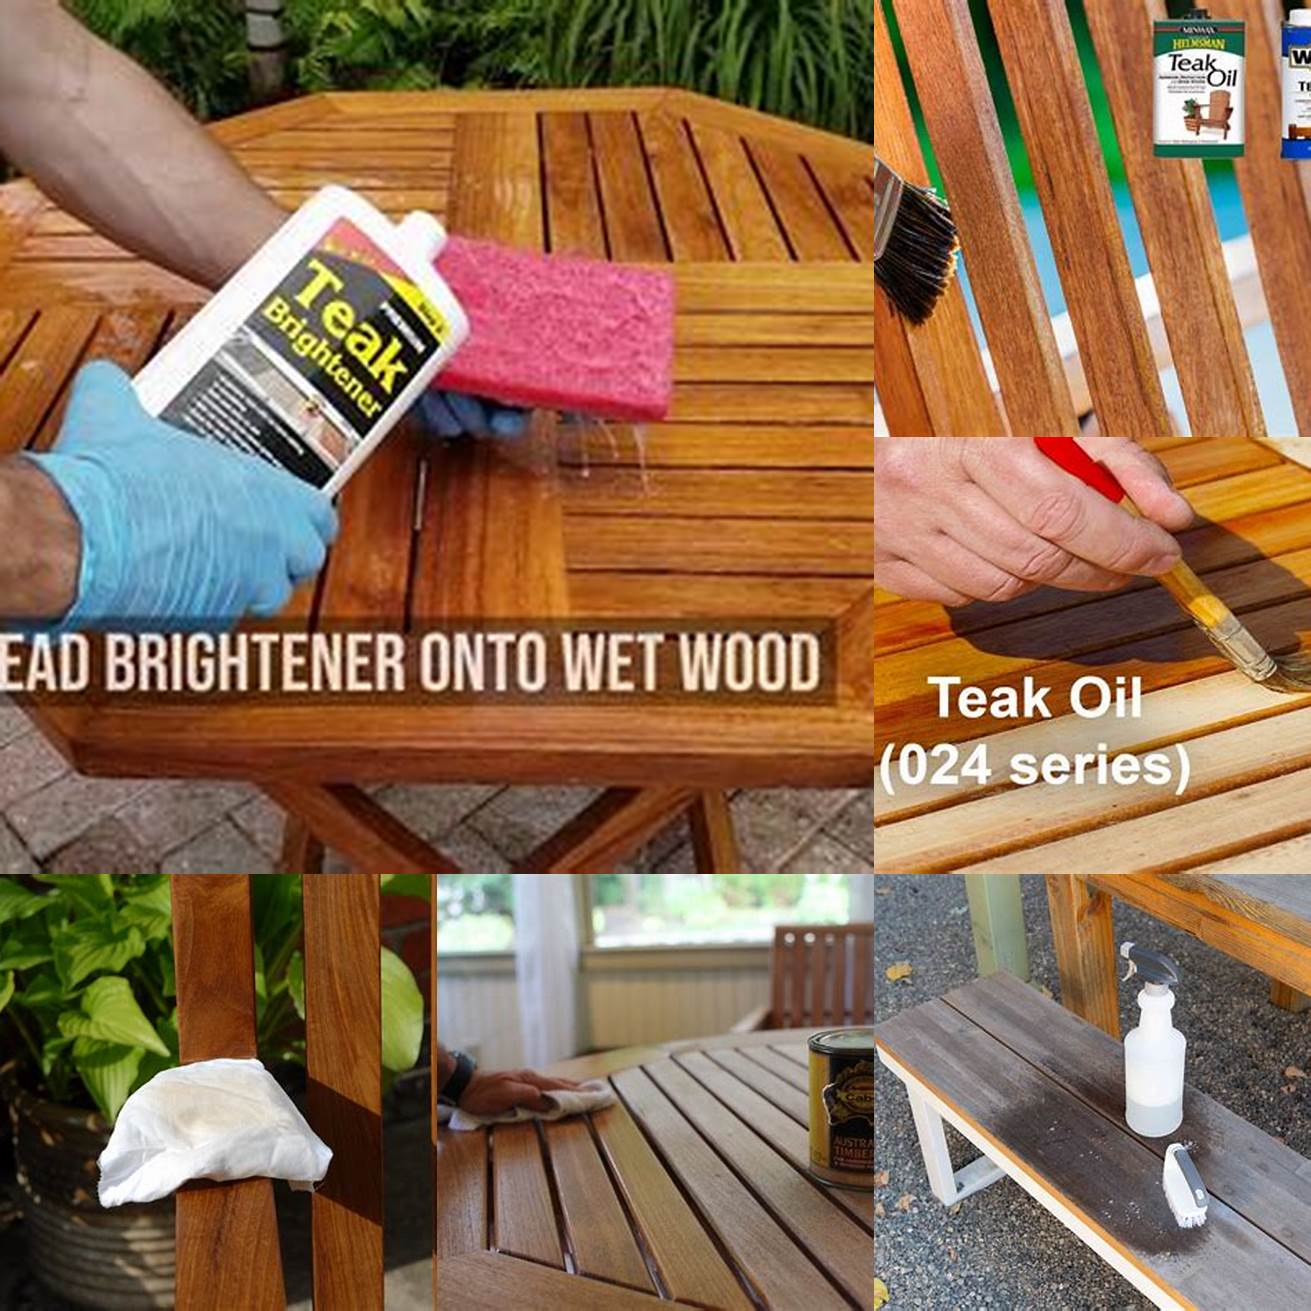 Apply teak oil with a soft cloth or brush